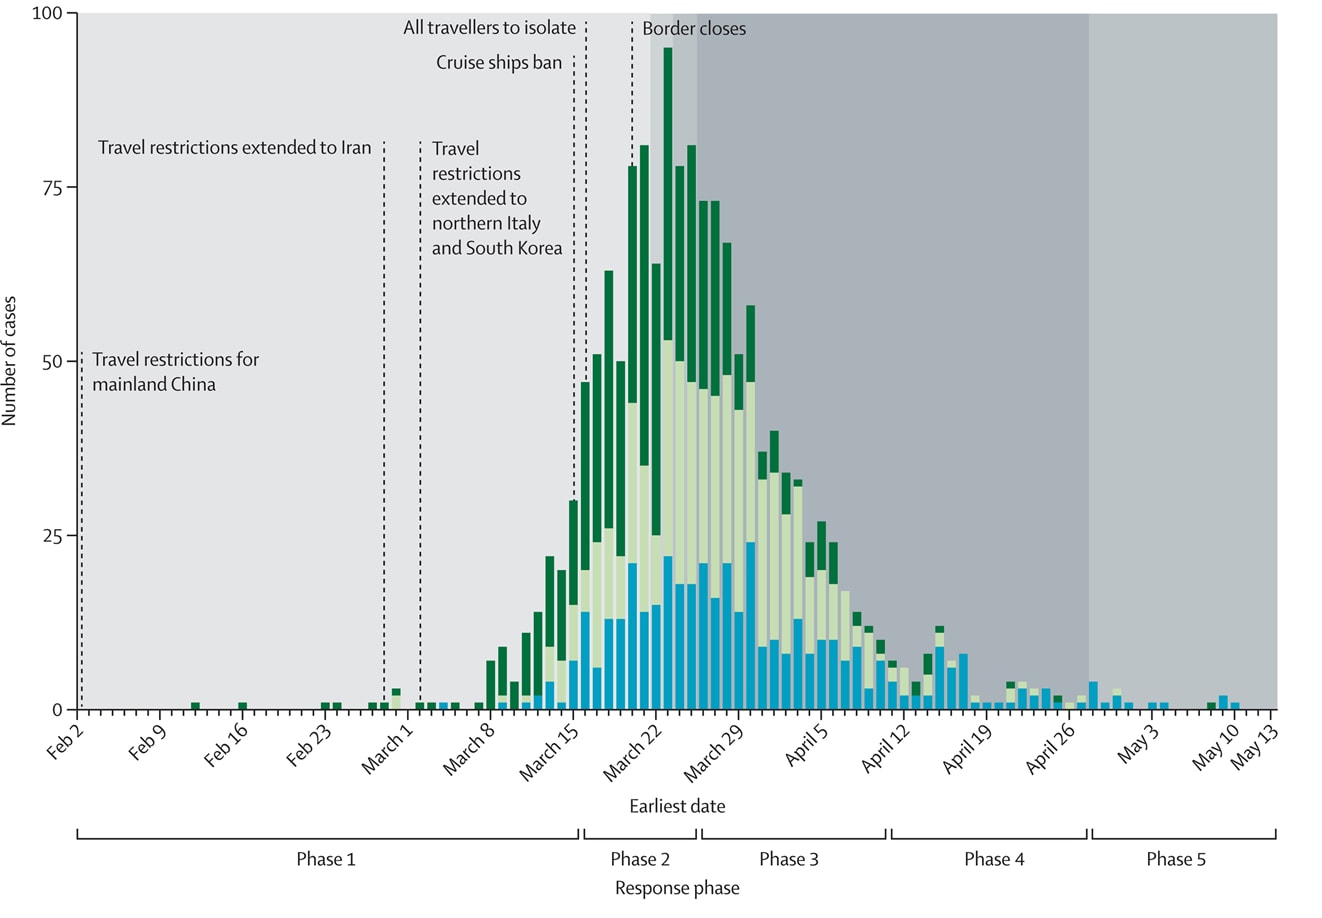 Epidemic curve of confirmed and probable COVID-19 cases in New Zealand by source of infection (imported cases, import-related cases, and locally acquired cases) and major NPIs